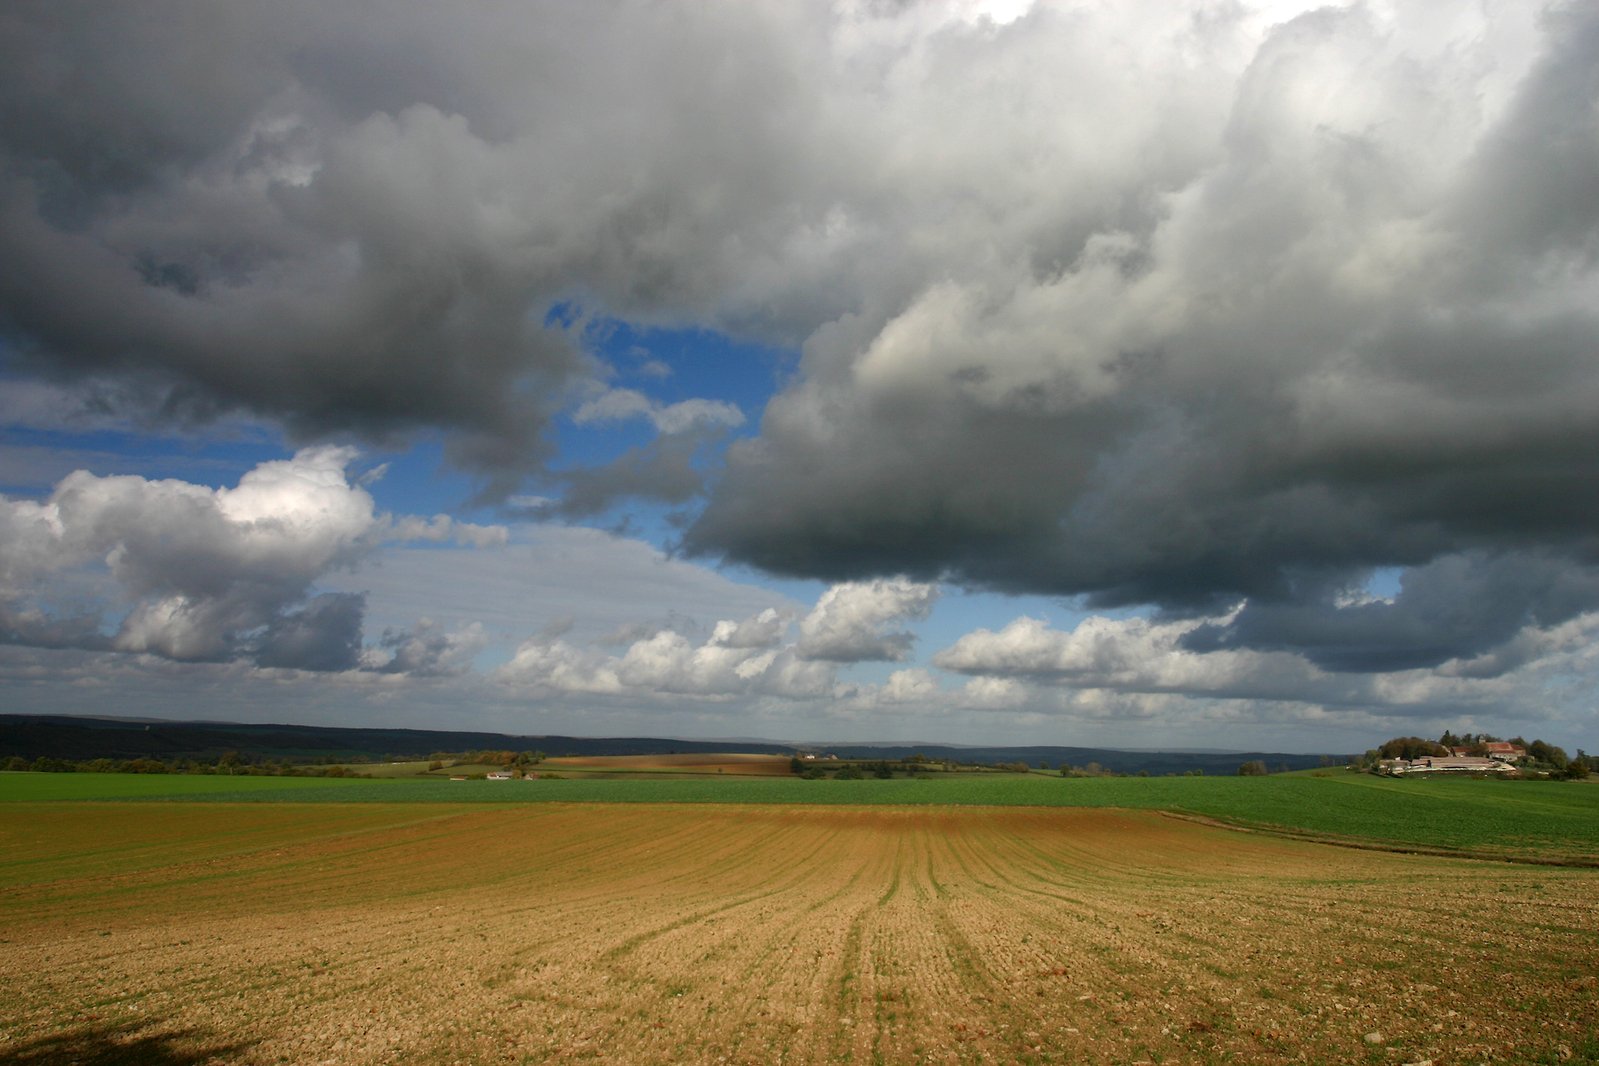 storm clouds hover over the countryside with a farm